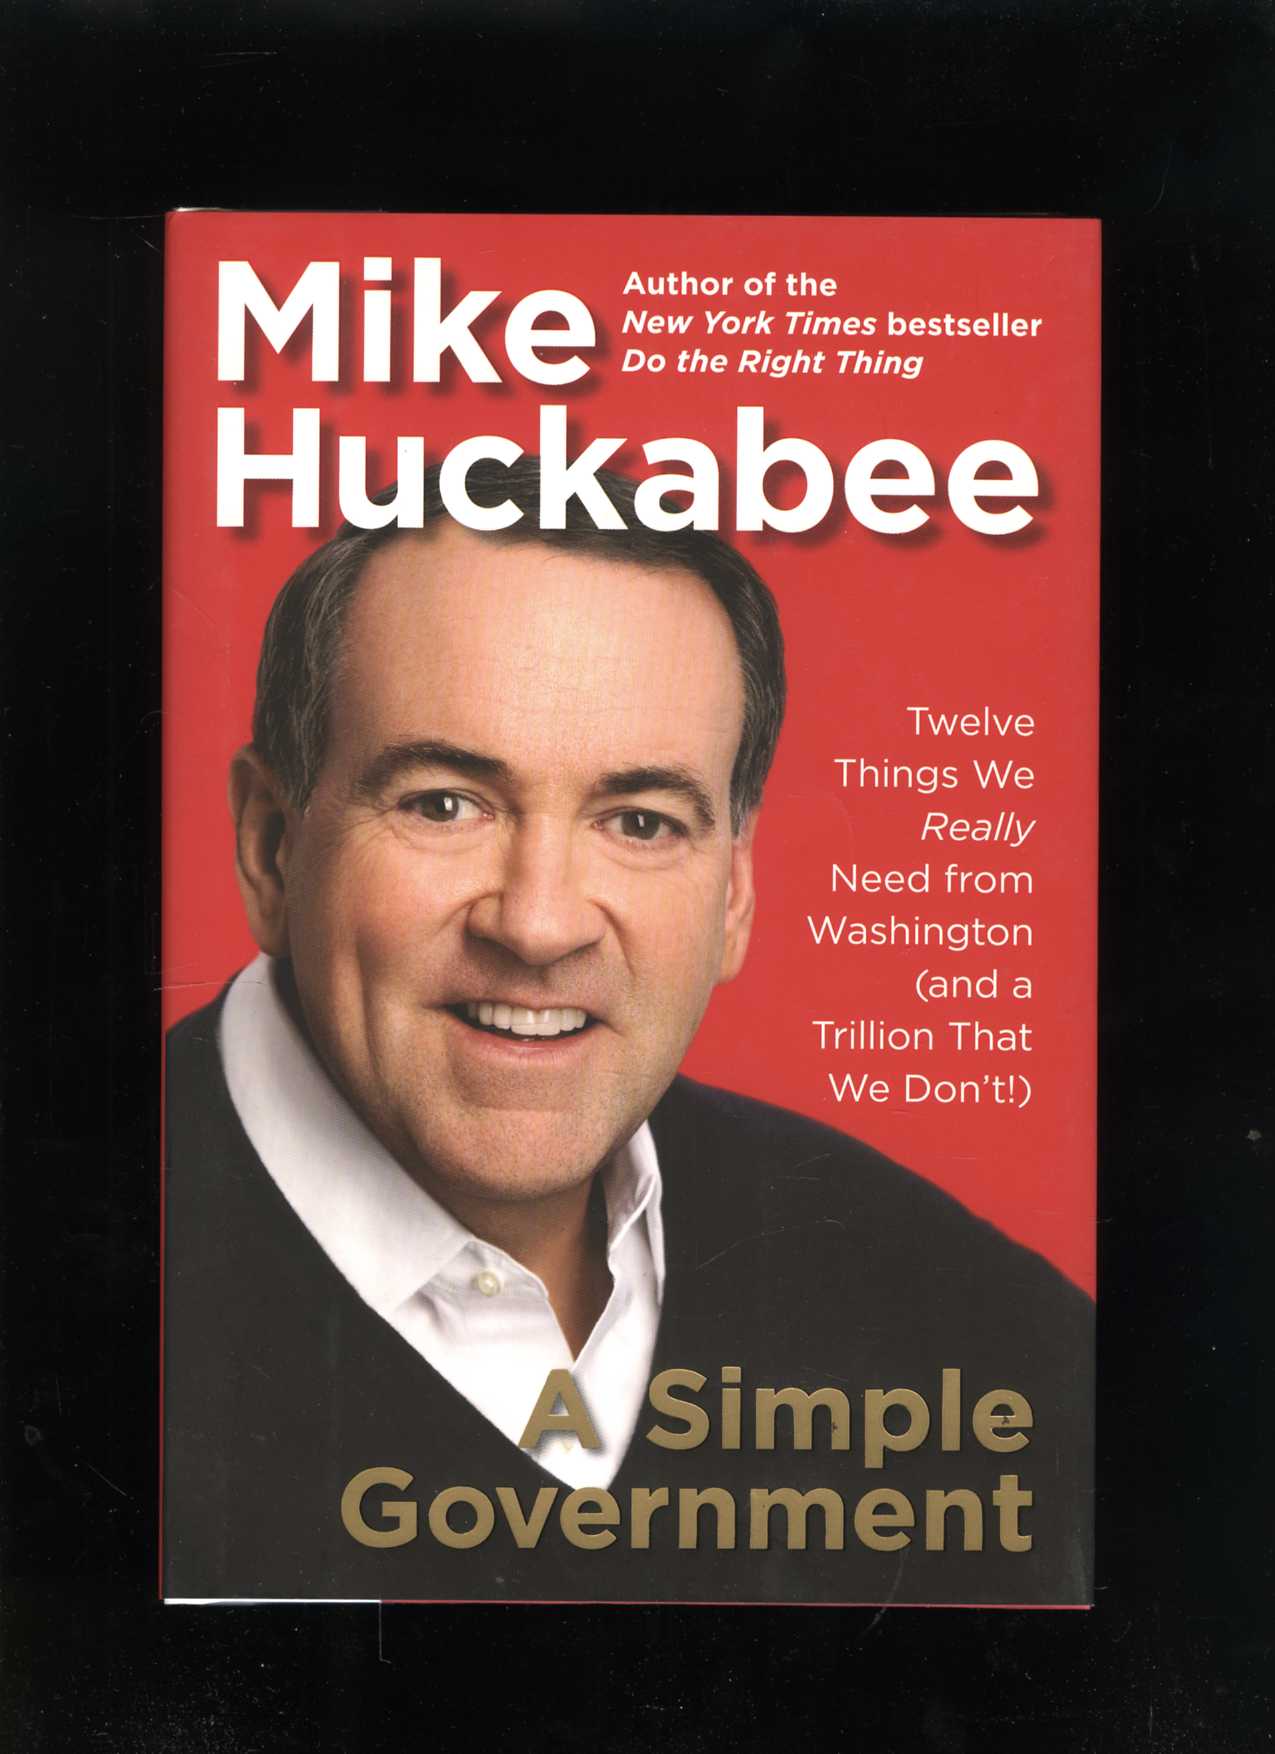 A Simple Government (Mike Huckabee)